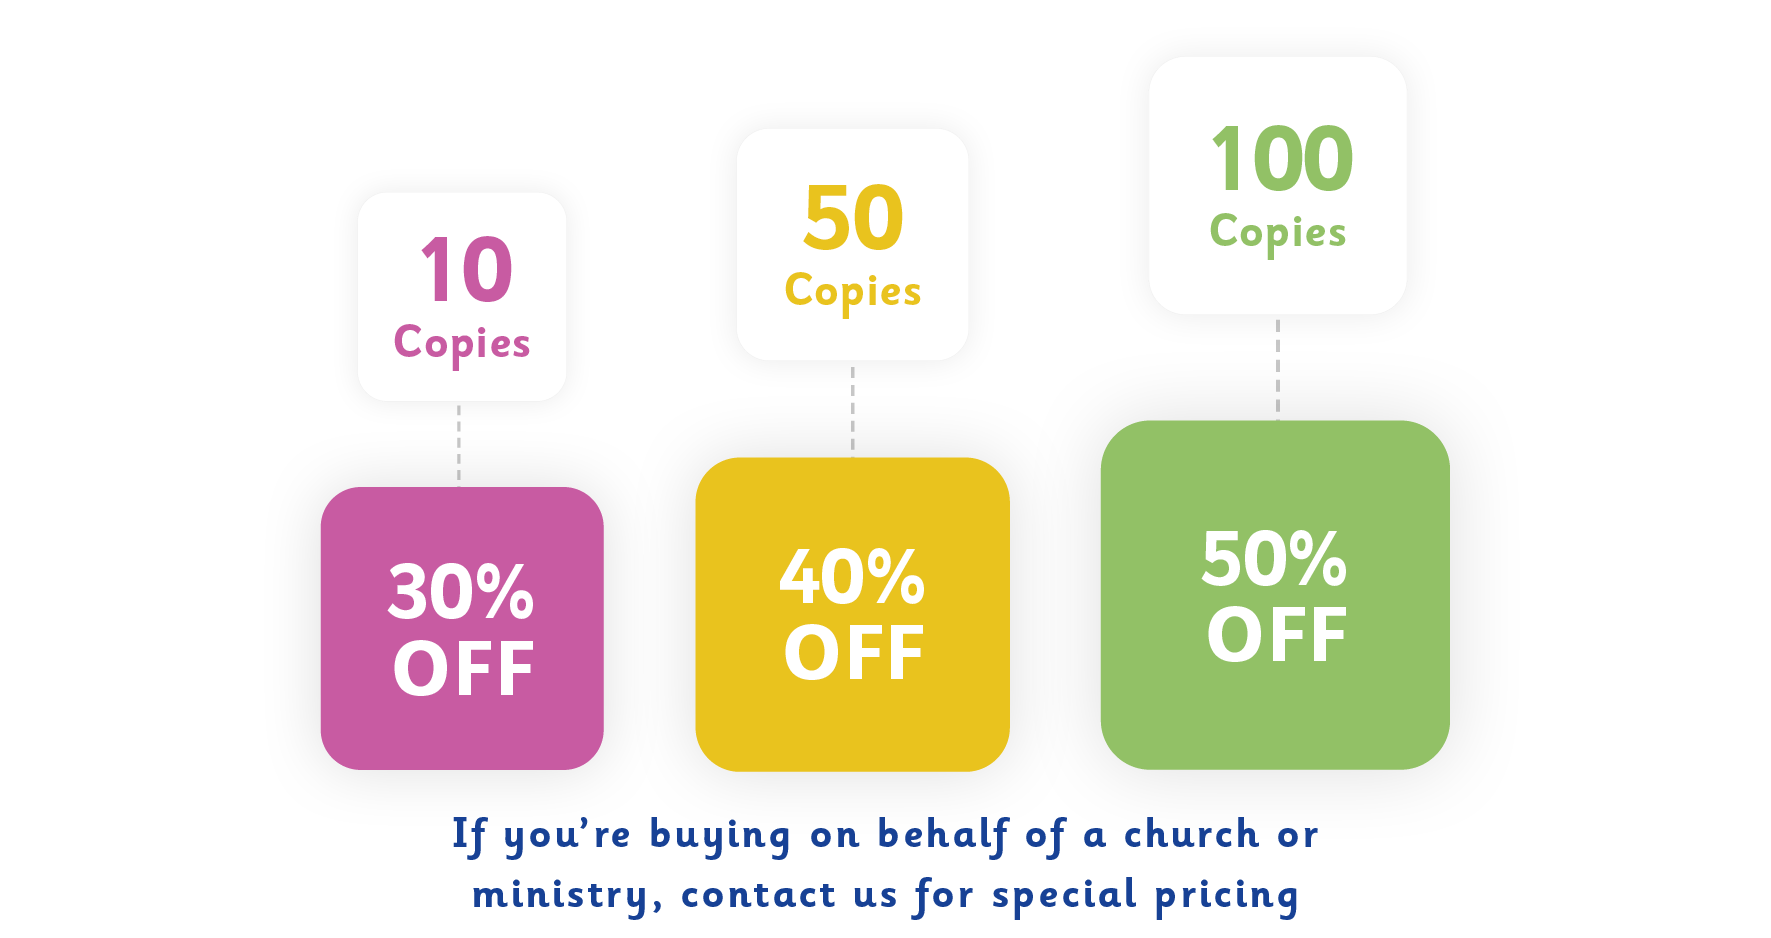 Graphic explaining the bulk discounts available for any God's Big Promises Bible Storybook product. If you purchase 10+ copies of any one product, you will receive a 30% discount, if you purchase 50+ copies you will receive a 40% discount, and 100+ copies will receive 50% off. If you're buying on behalf of a church or ministry, use the contact link at the bottom of the page for special pricing.